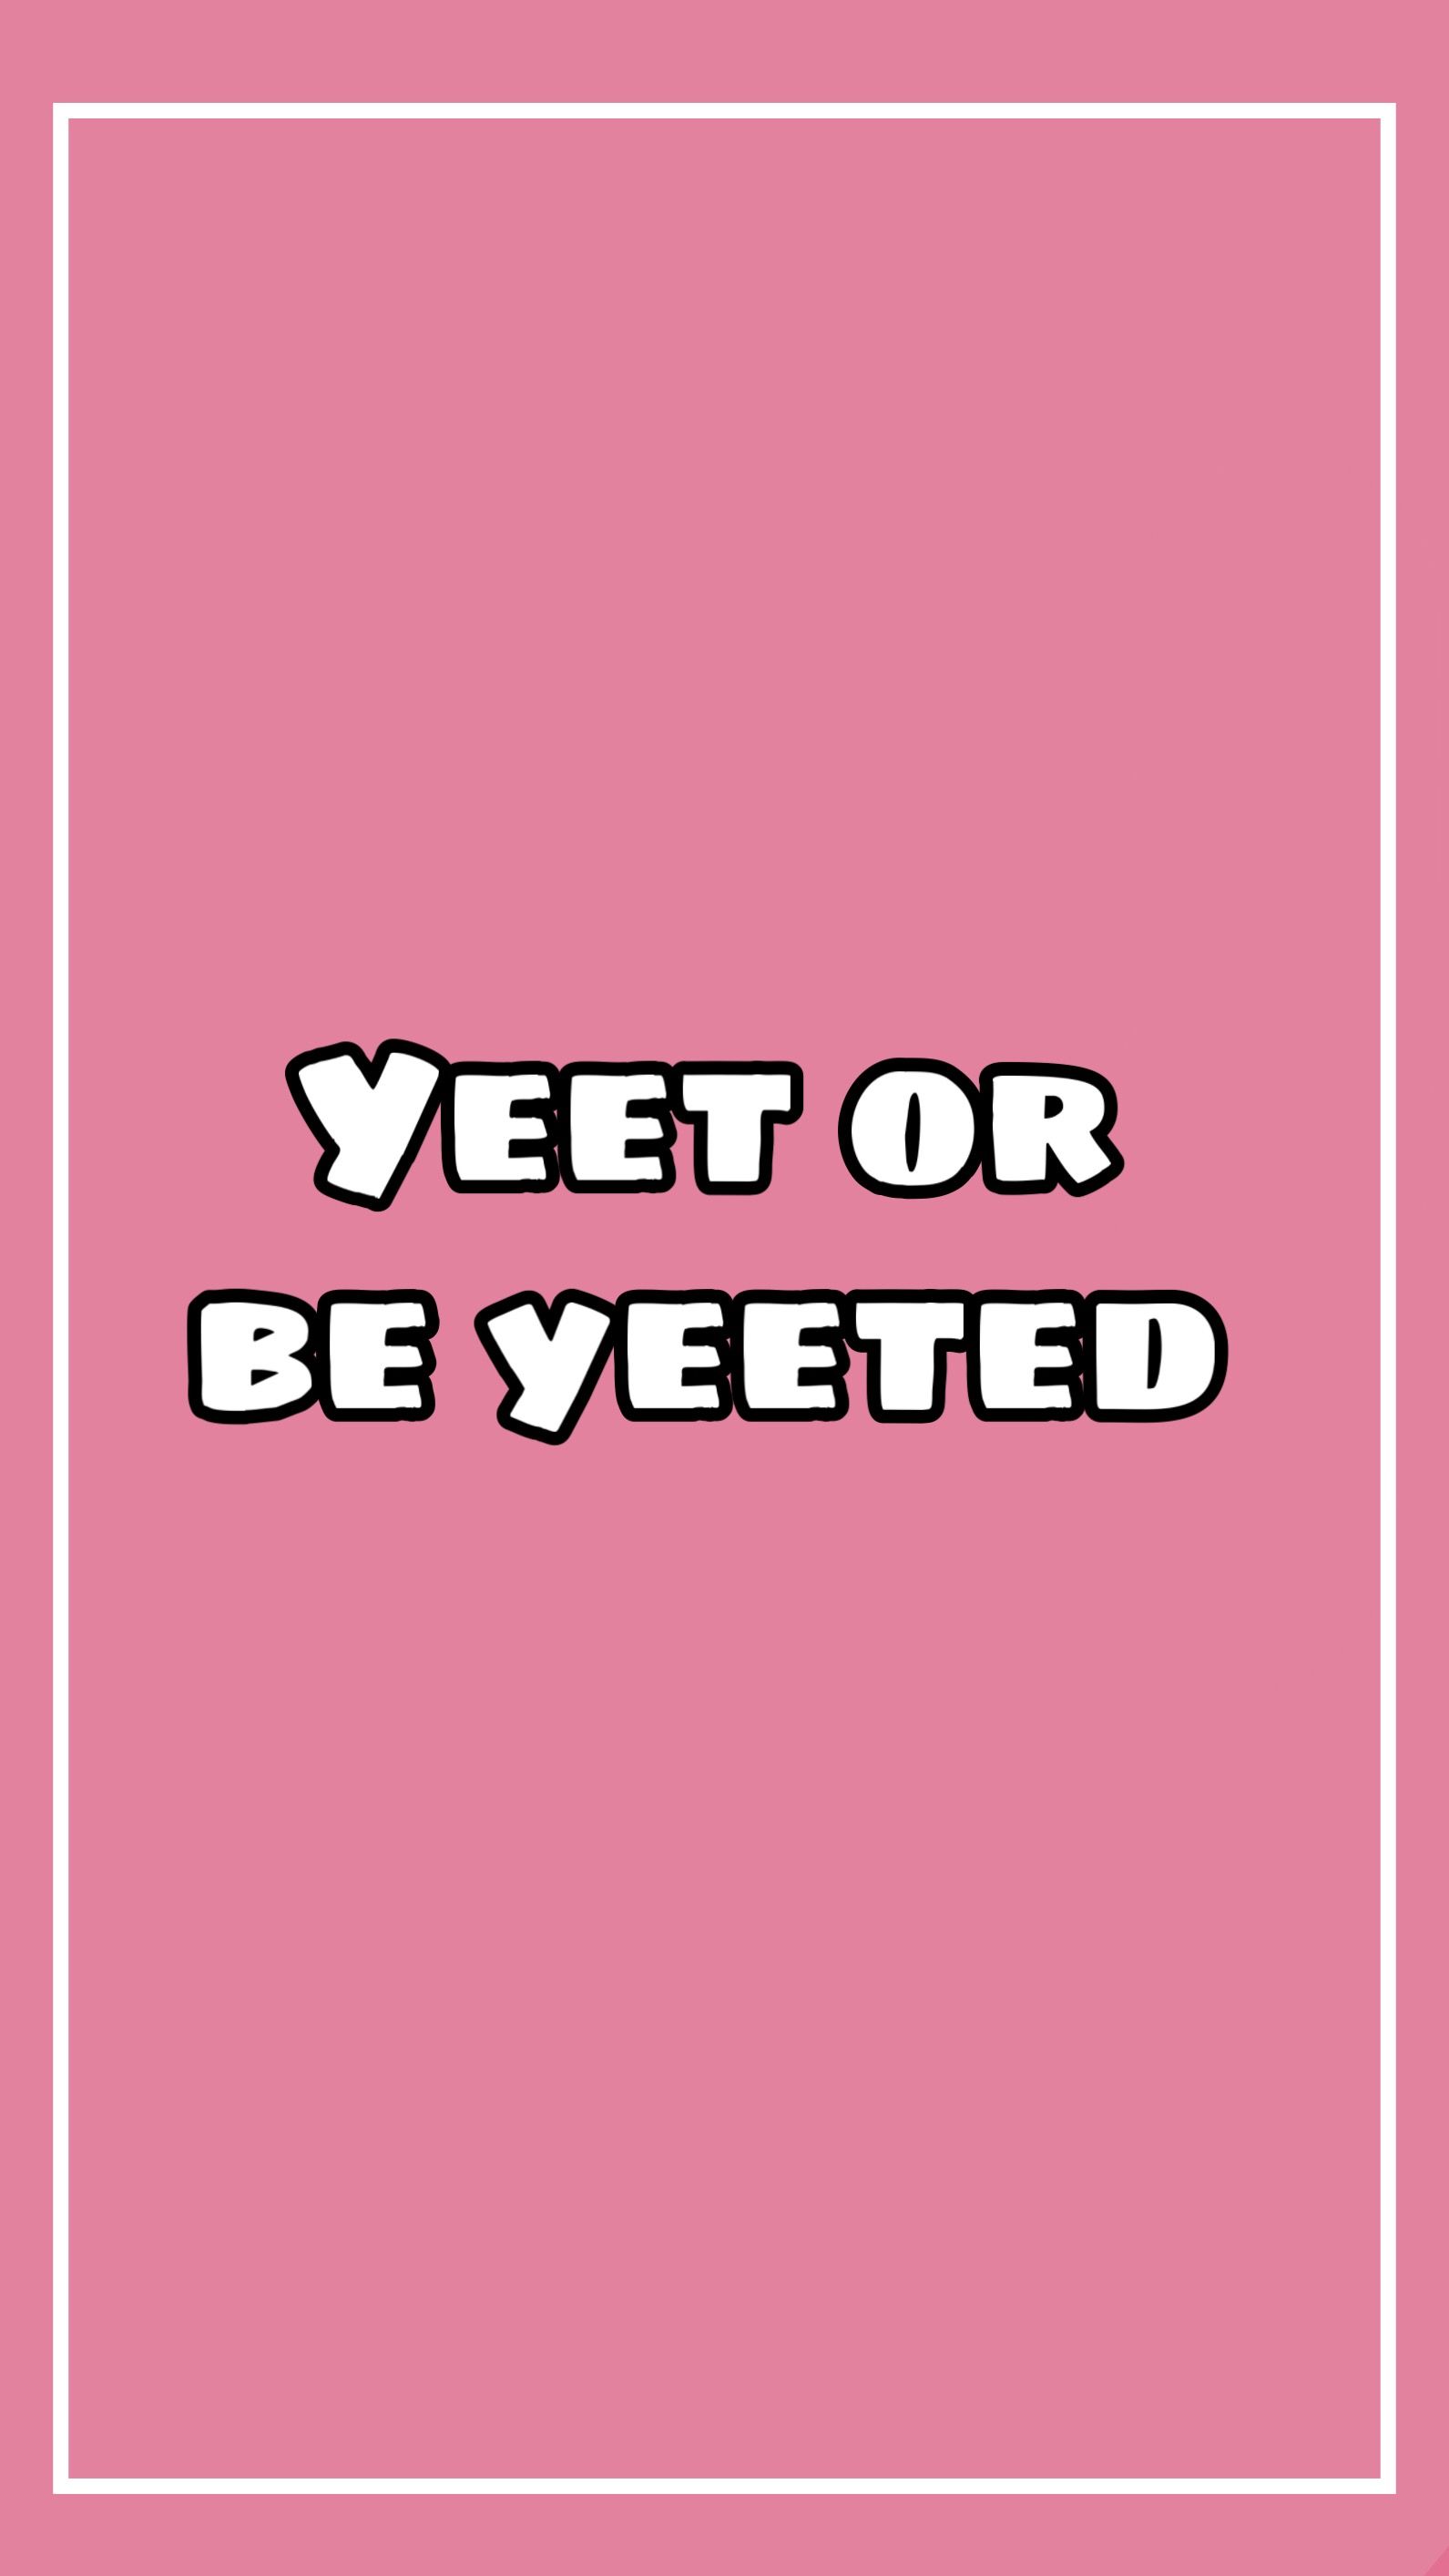 Yeet or be yeeted. iPhone background wallpaper, Cute wallpaper, iPhone background